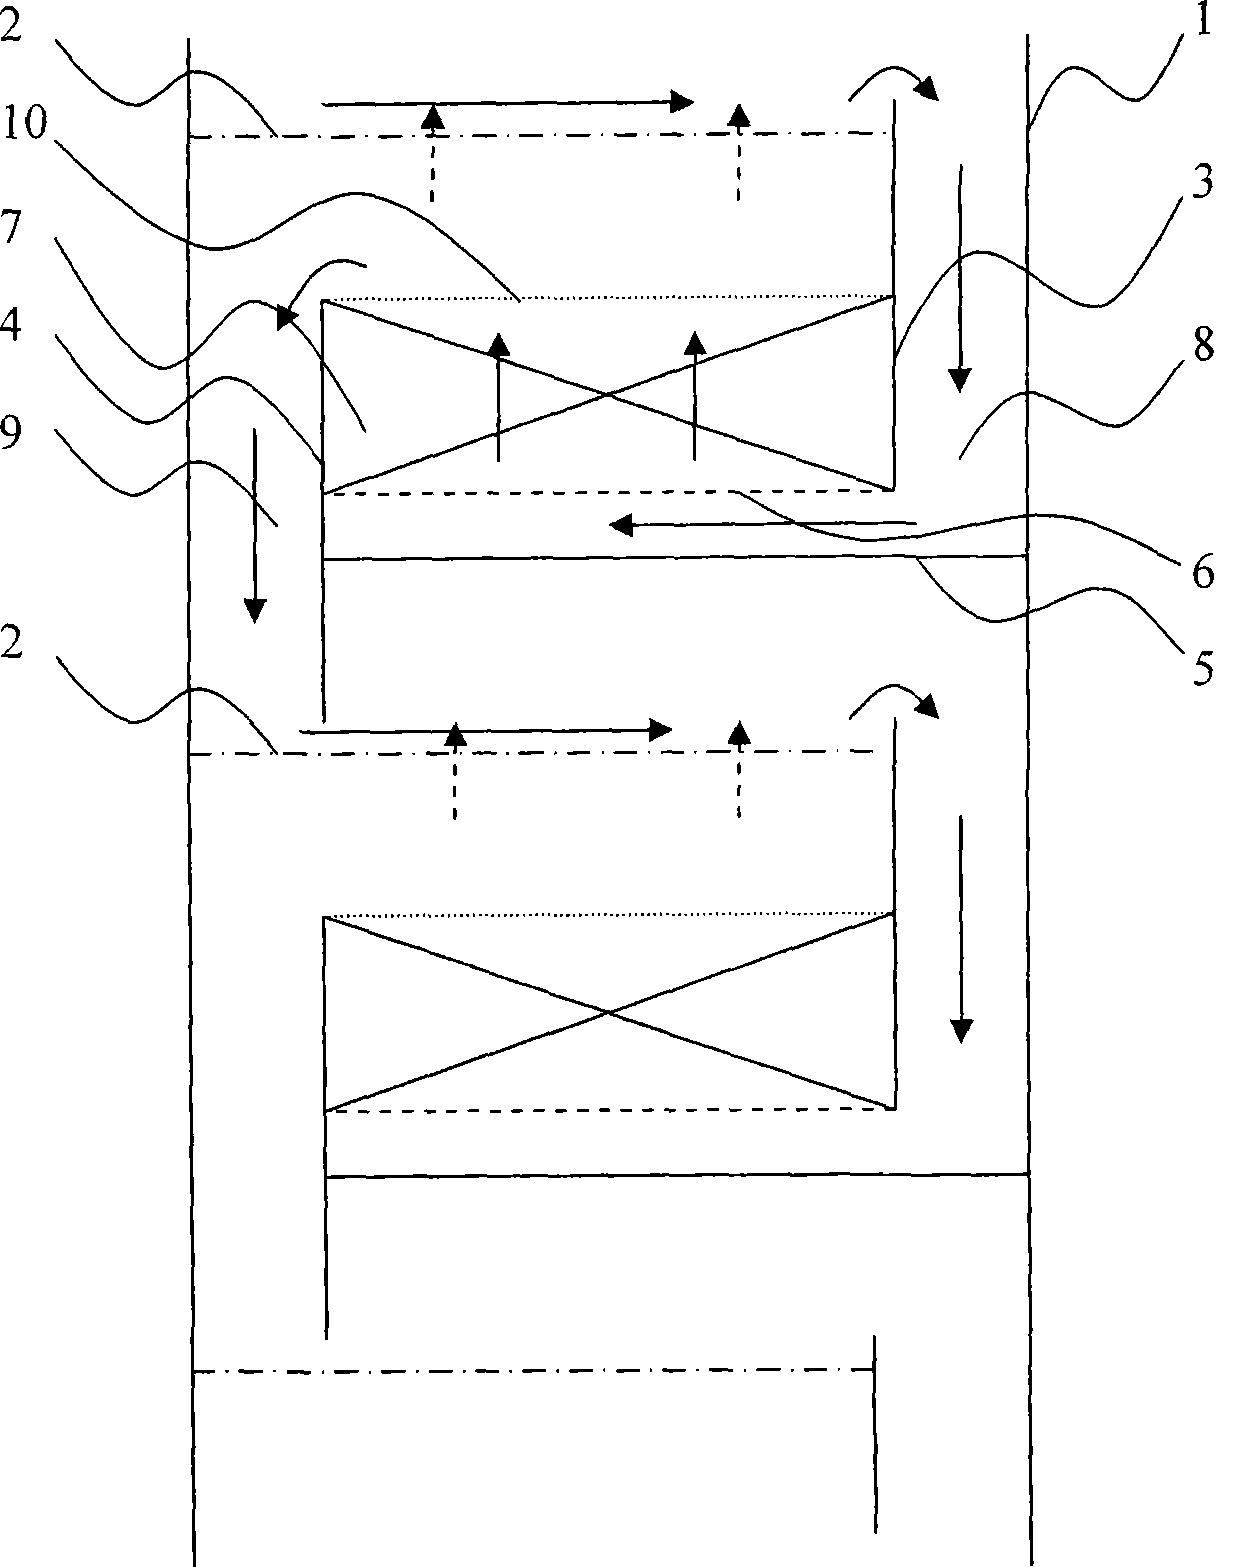 Reaction segment structure of catalytic distillation tower